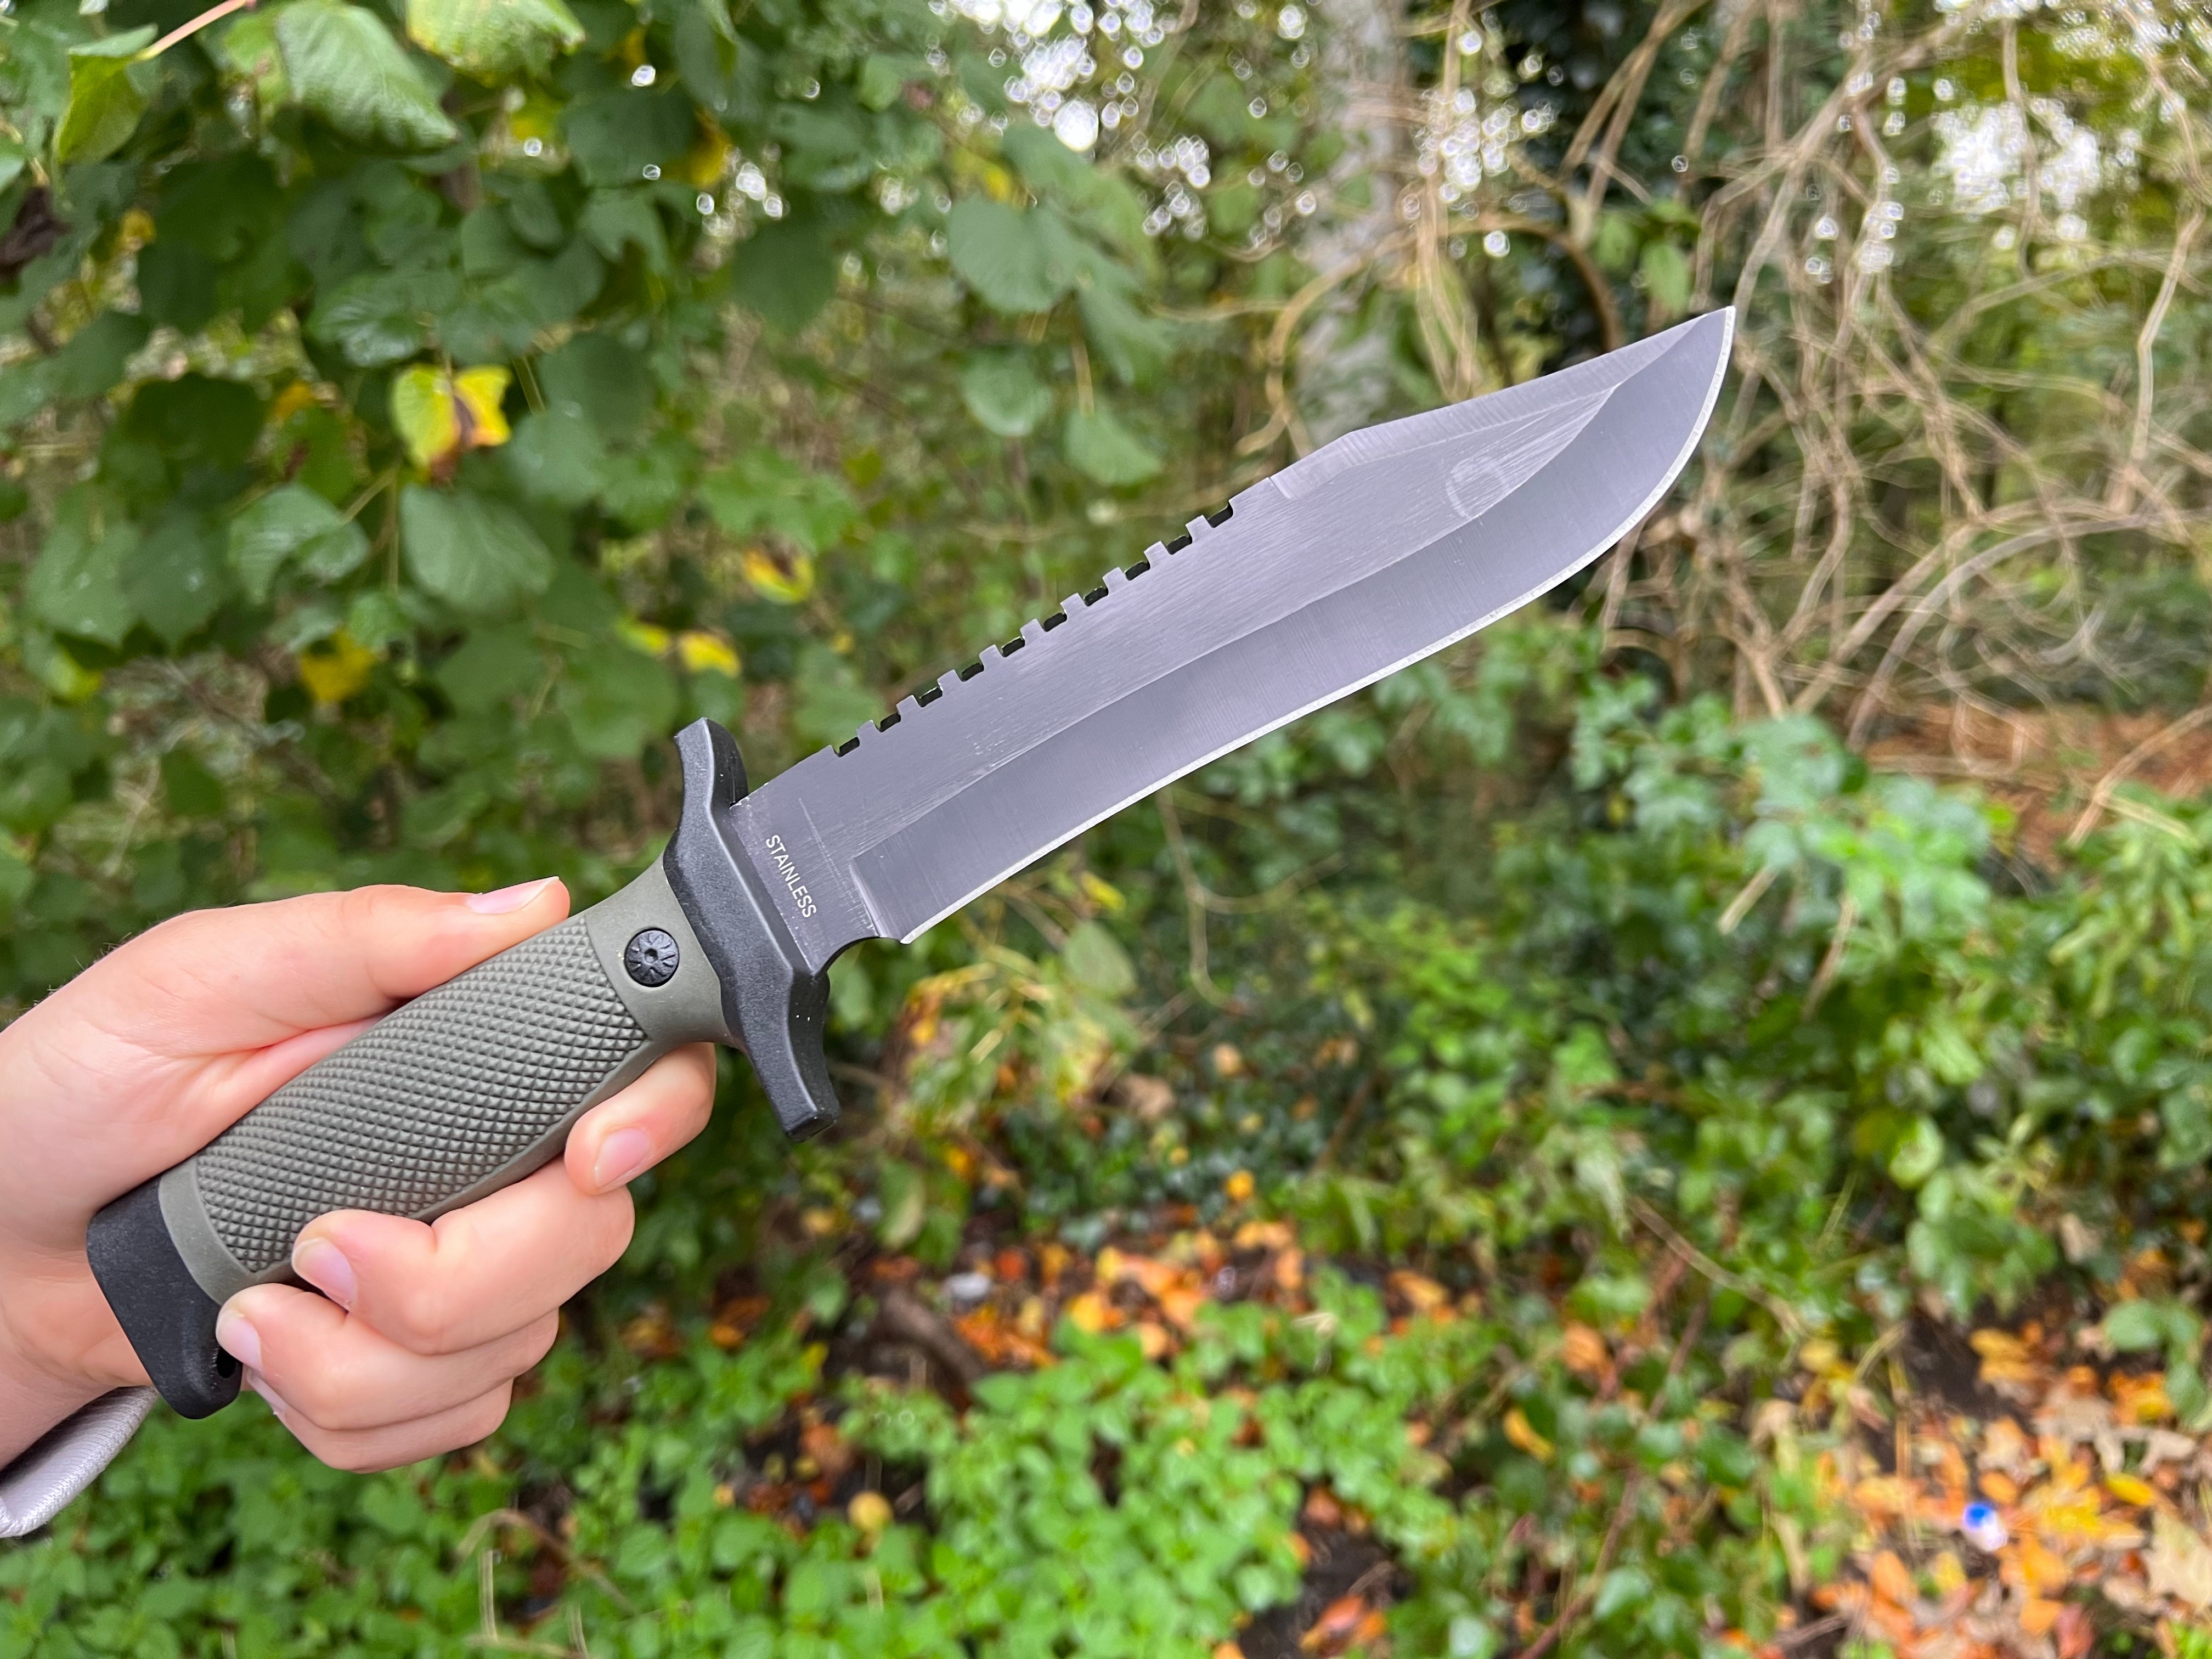 Outdoor Hunting Knife "Forest Ranger" - Robust Stainless Steel Blade in Black-Olive Rubberized Handle-Incl.  Polymer sheath with belt and leg urts